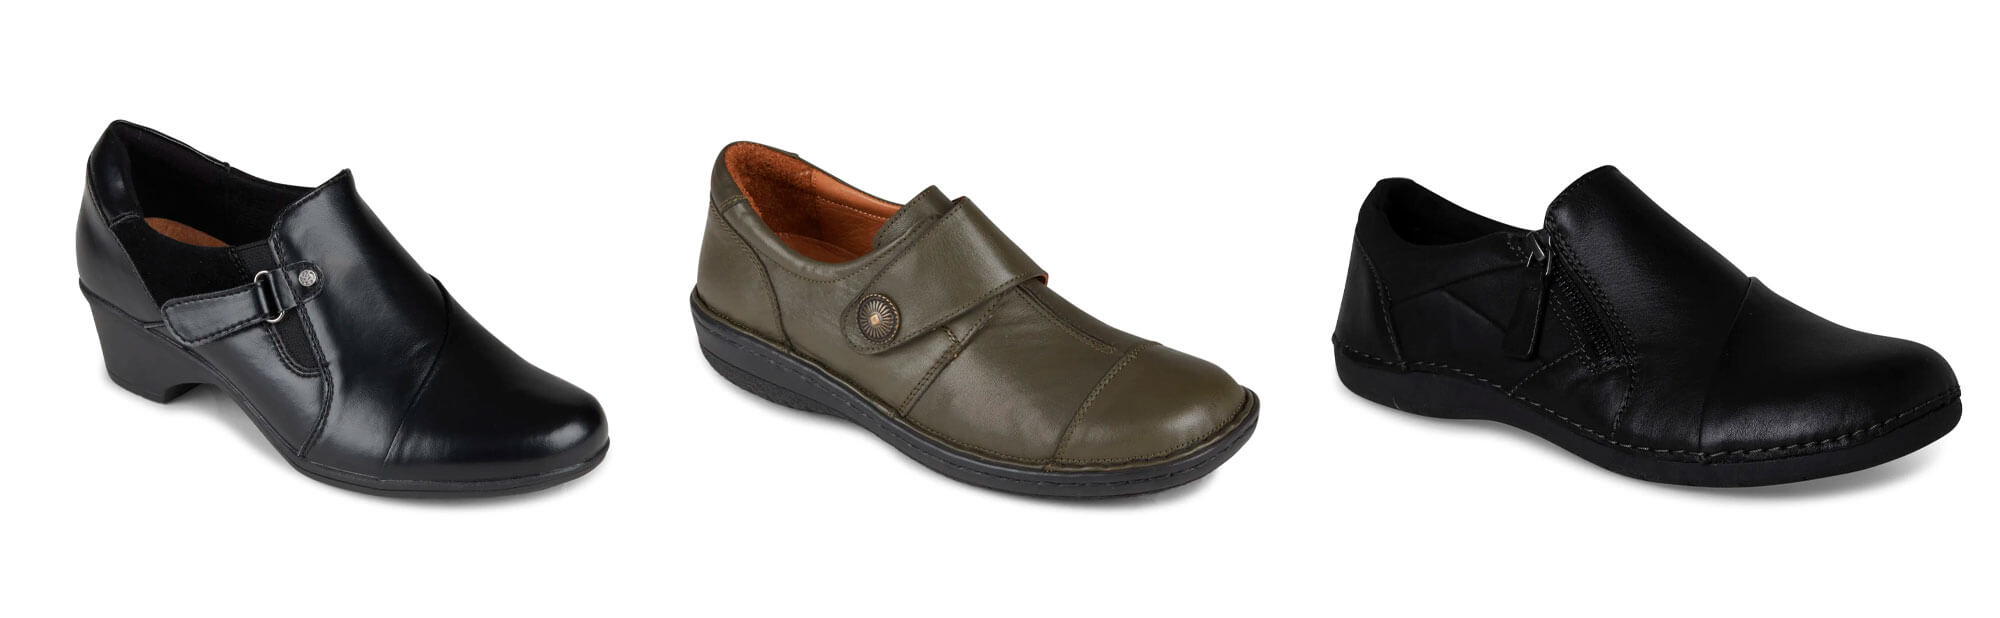 The Most Comfortable Women's Clogs On